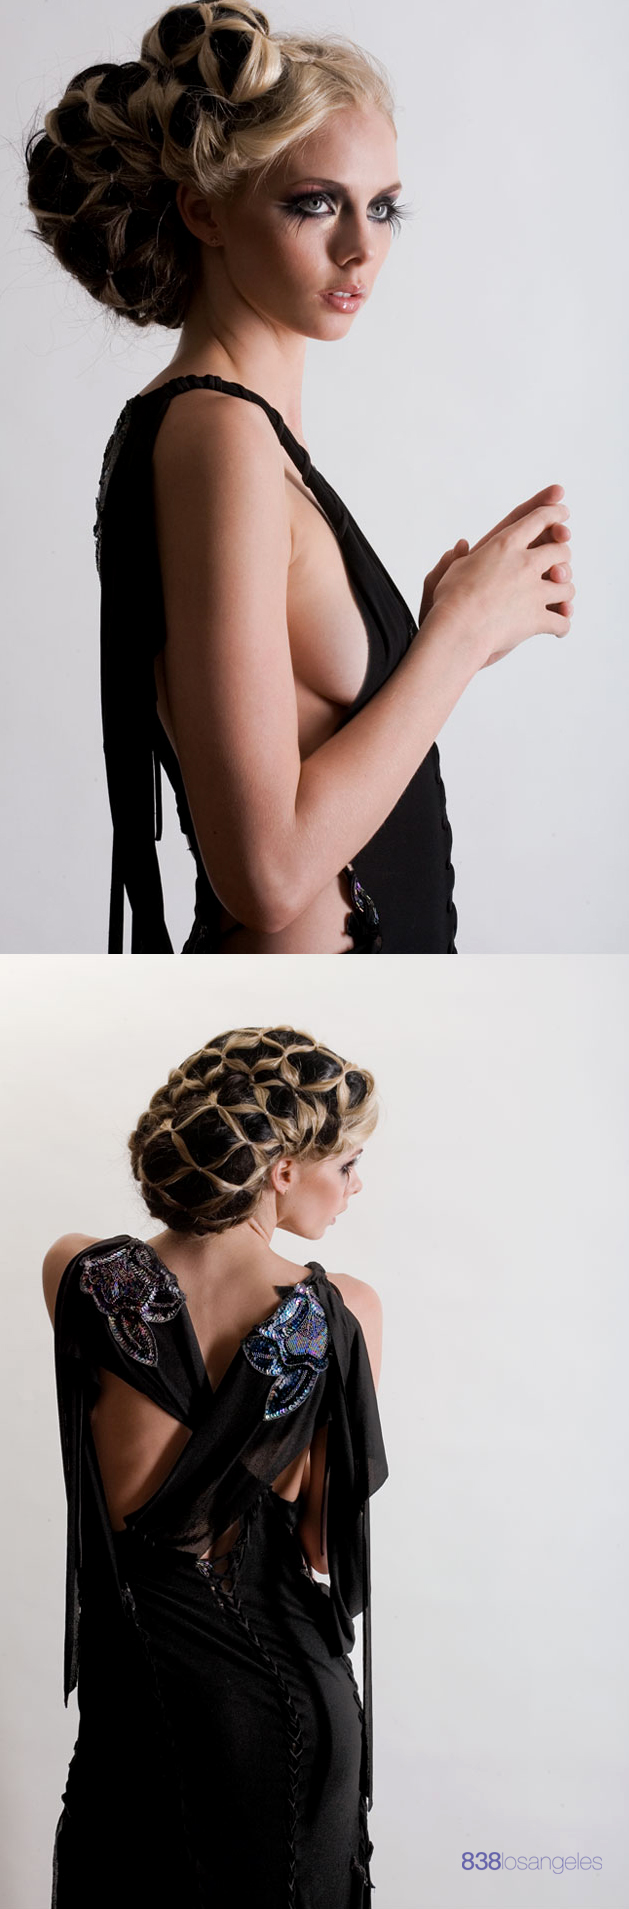 Female model photo shoot of Danielle Kelly by Studio838LosAngeles in 838 LOS ANGELES, hair styled by Linh Nguyen